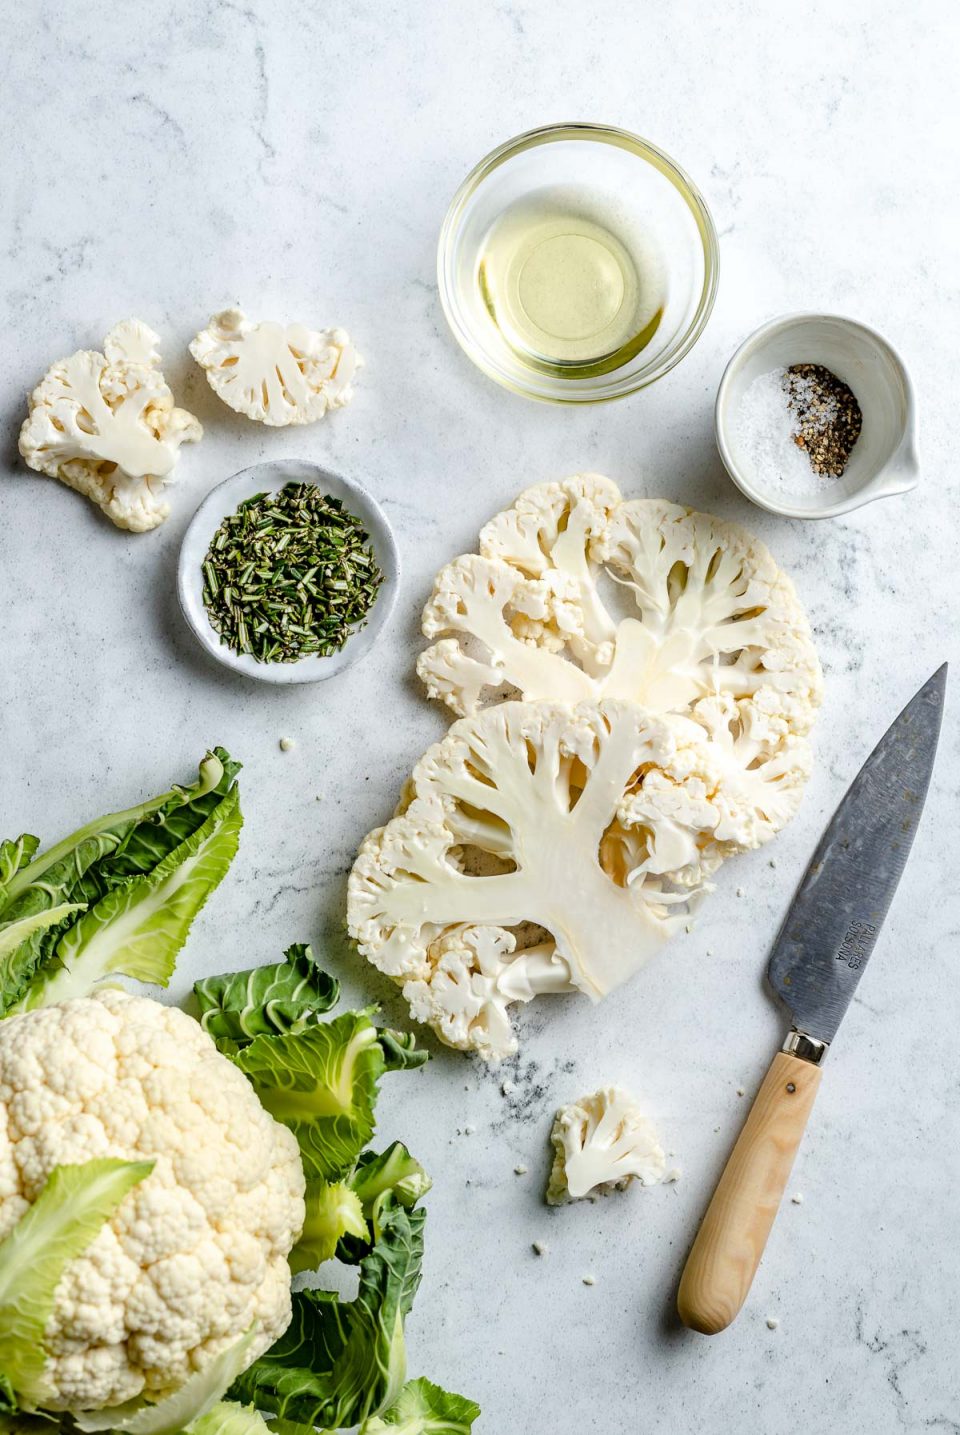 Grilled cauliflower ingredients arranged on a white & grey marble surface - a whole head of cauliflower, sliced cauliflower steaks & a few florets, avocado oil, kosher salt, ground black pepper, & chopped fresh herbs. A pairing knife rests on the surface next to the ingredients.